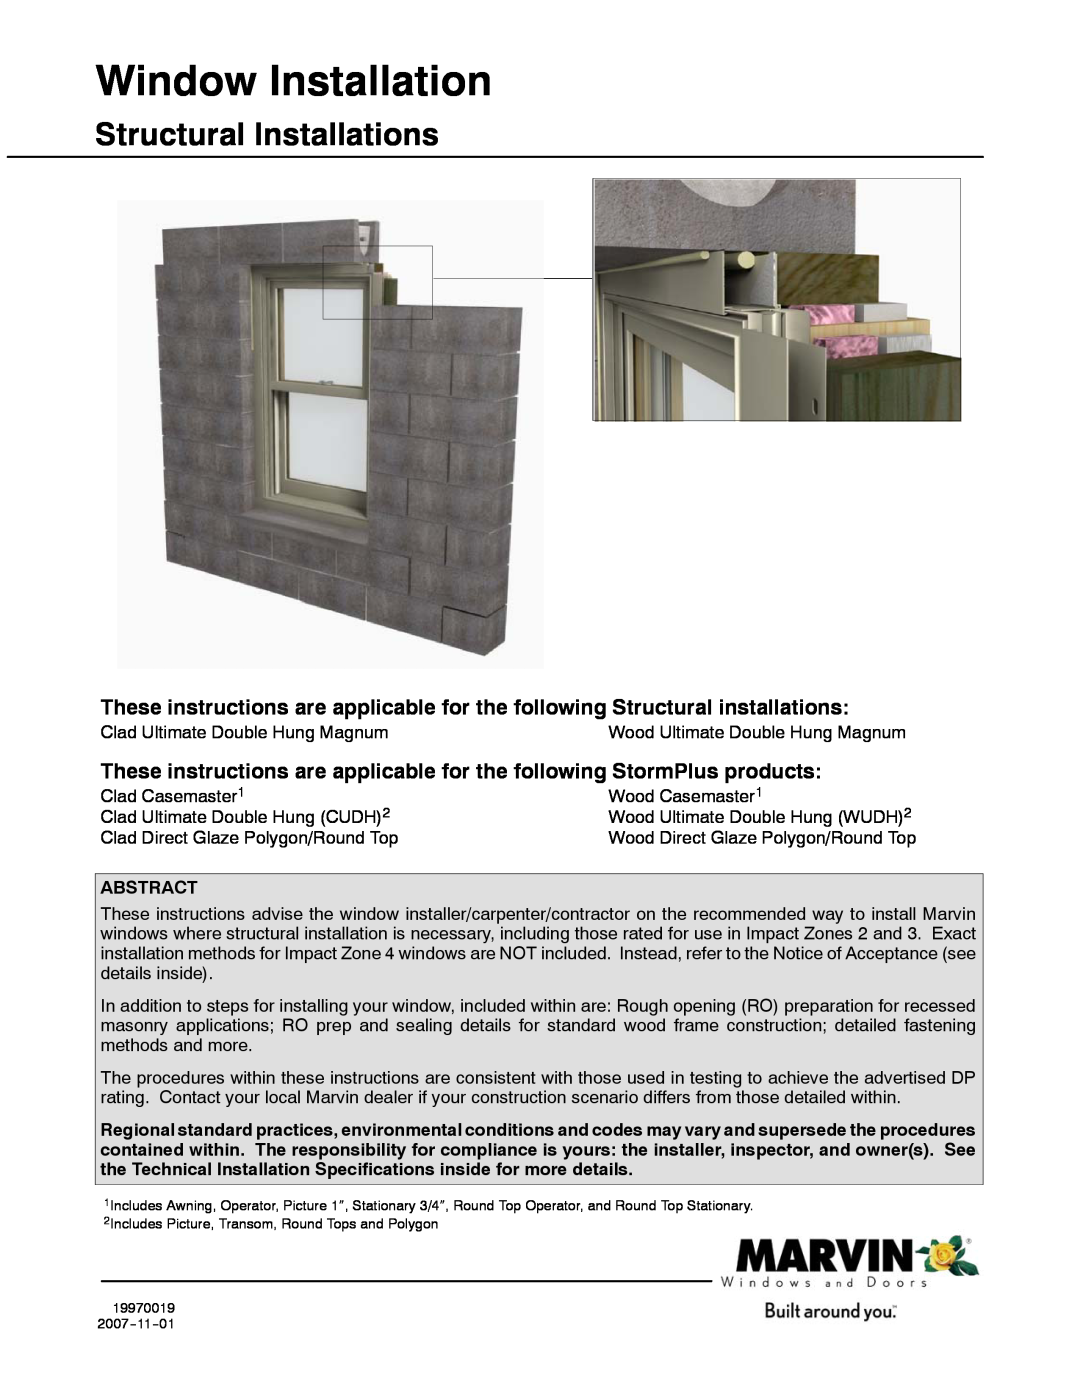 Marvin manual Abstract, Window Installation, Structural Installations 